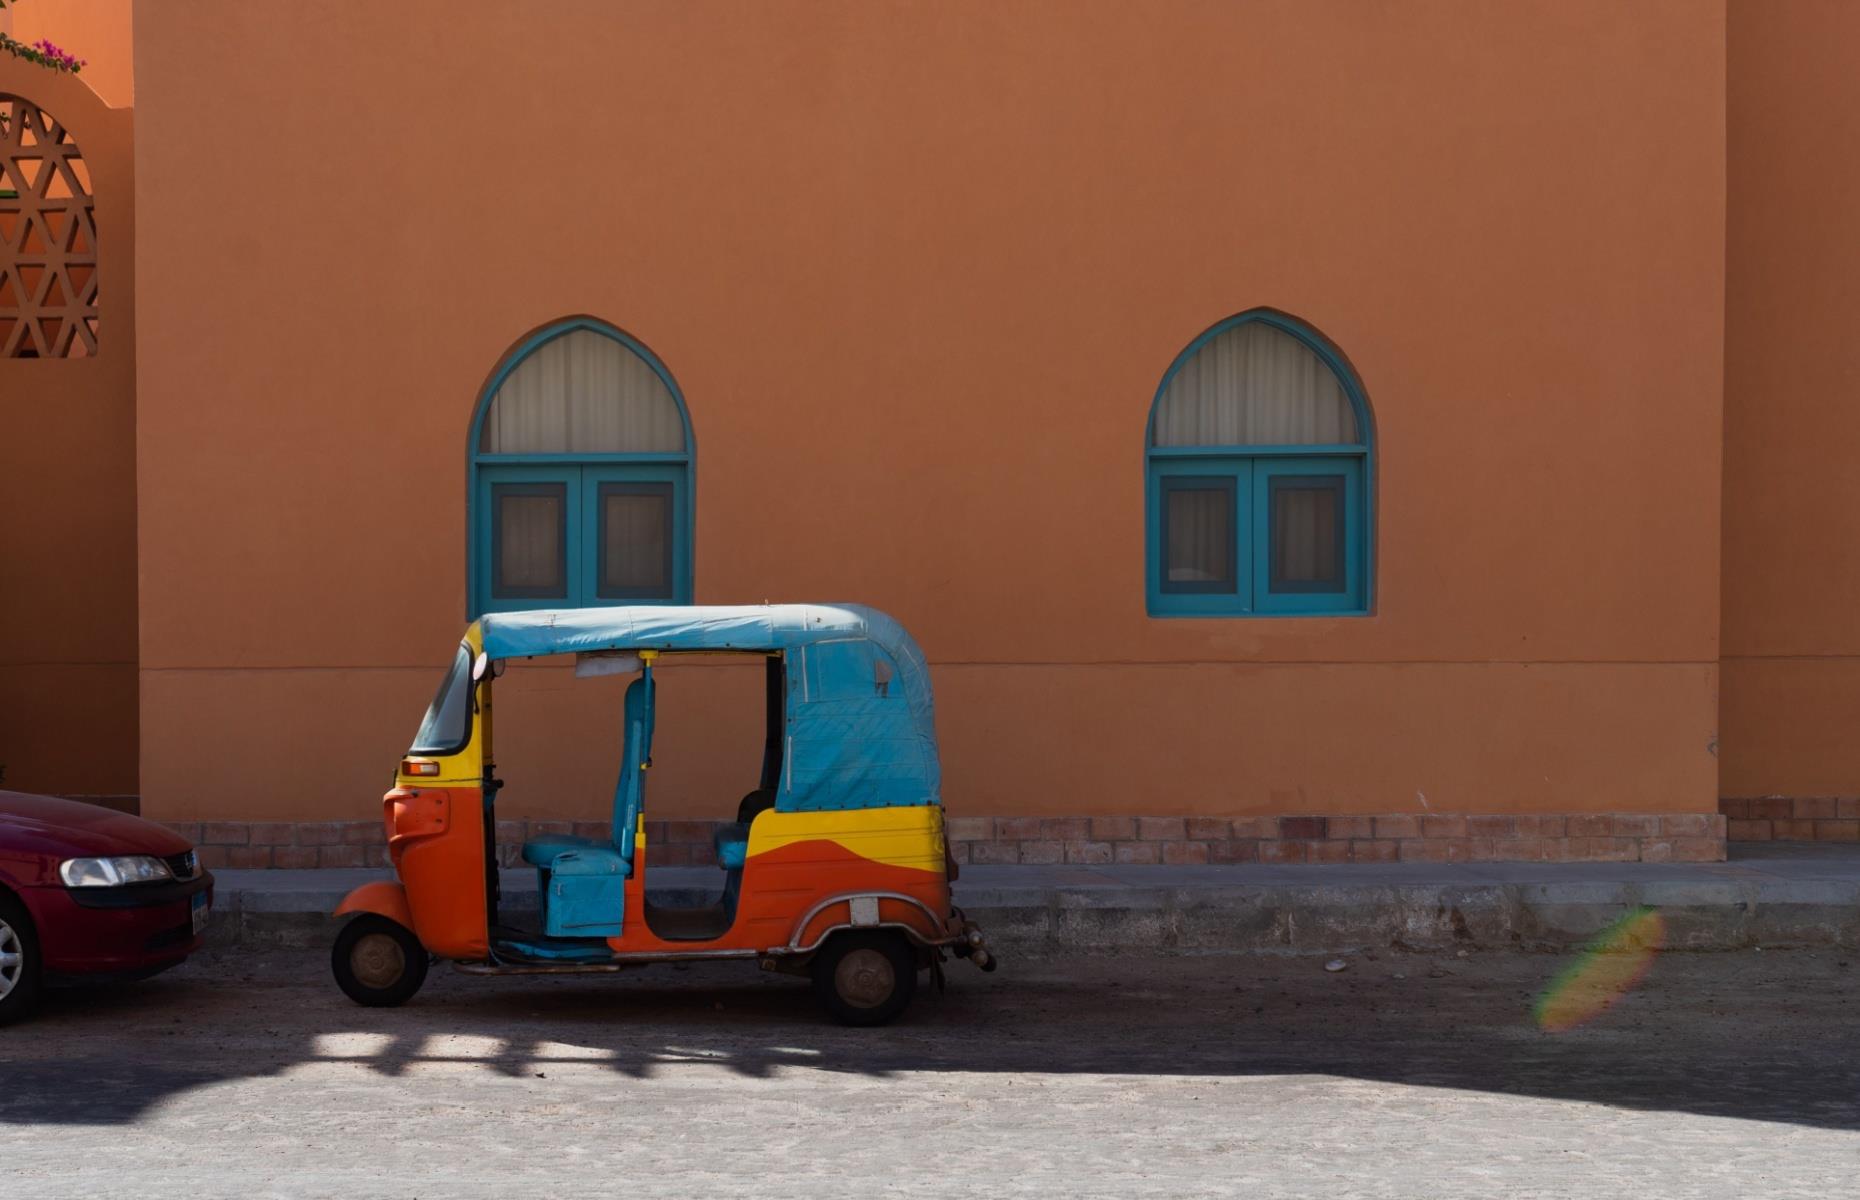 <p>A colorful quirk of El Gouna is that the most prominent method of transport, aside from cars, is the tuk-tuk. With a set journey price of 45 EGP each way (around 90¢), these motorised rickshaws also provide a cheap and easy way to hop around the town (nothing is very far away). Most offer cheap tours too – look for a sign in the cab, or just ask. Find them adding pops of pink, yellow and orange to the scene in downtown and Abu Tig Marina, or ask your hotel to call one for you. There are regular taxis too.</p>